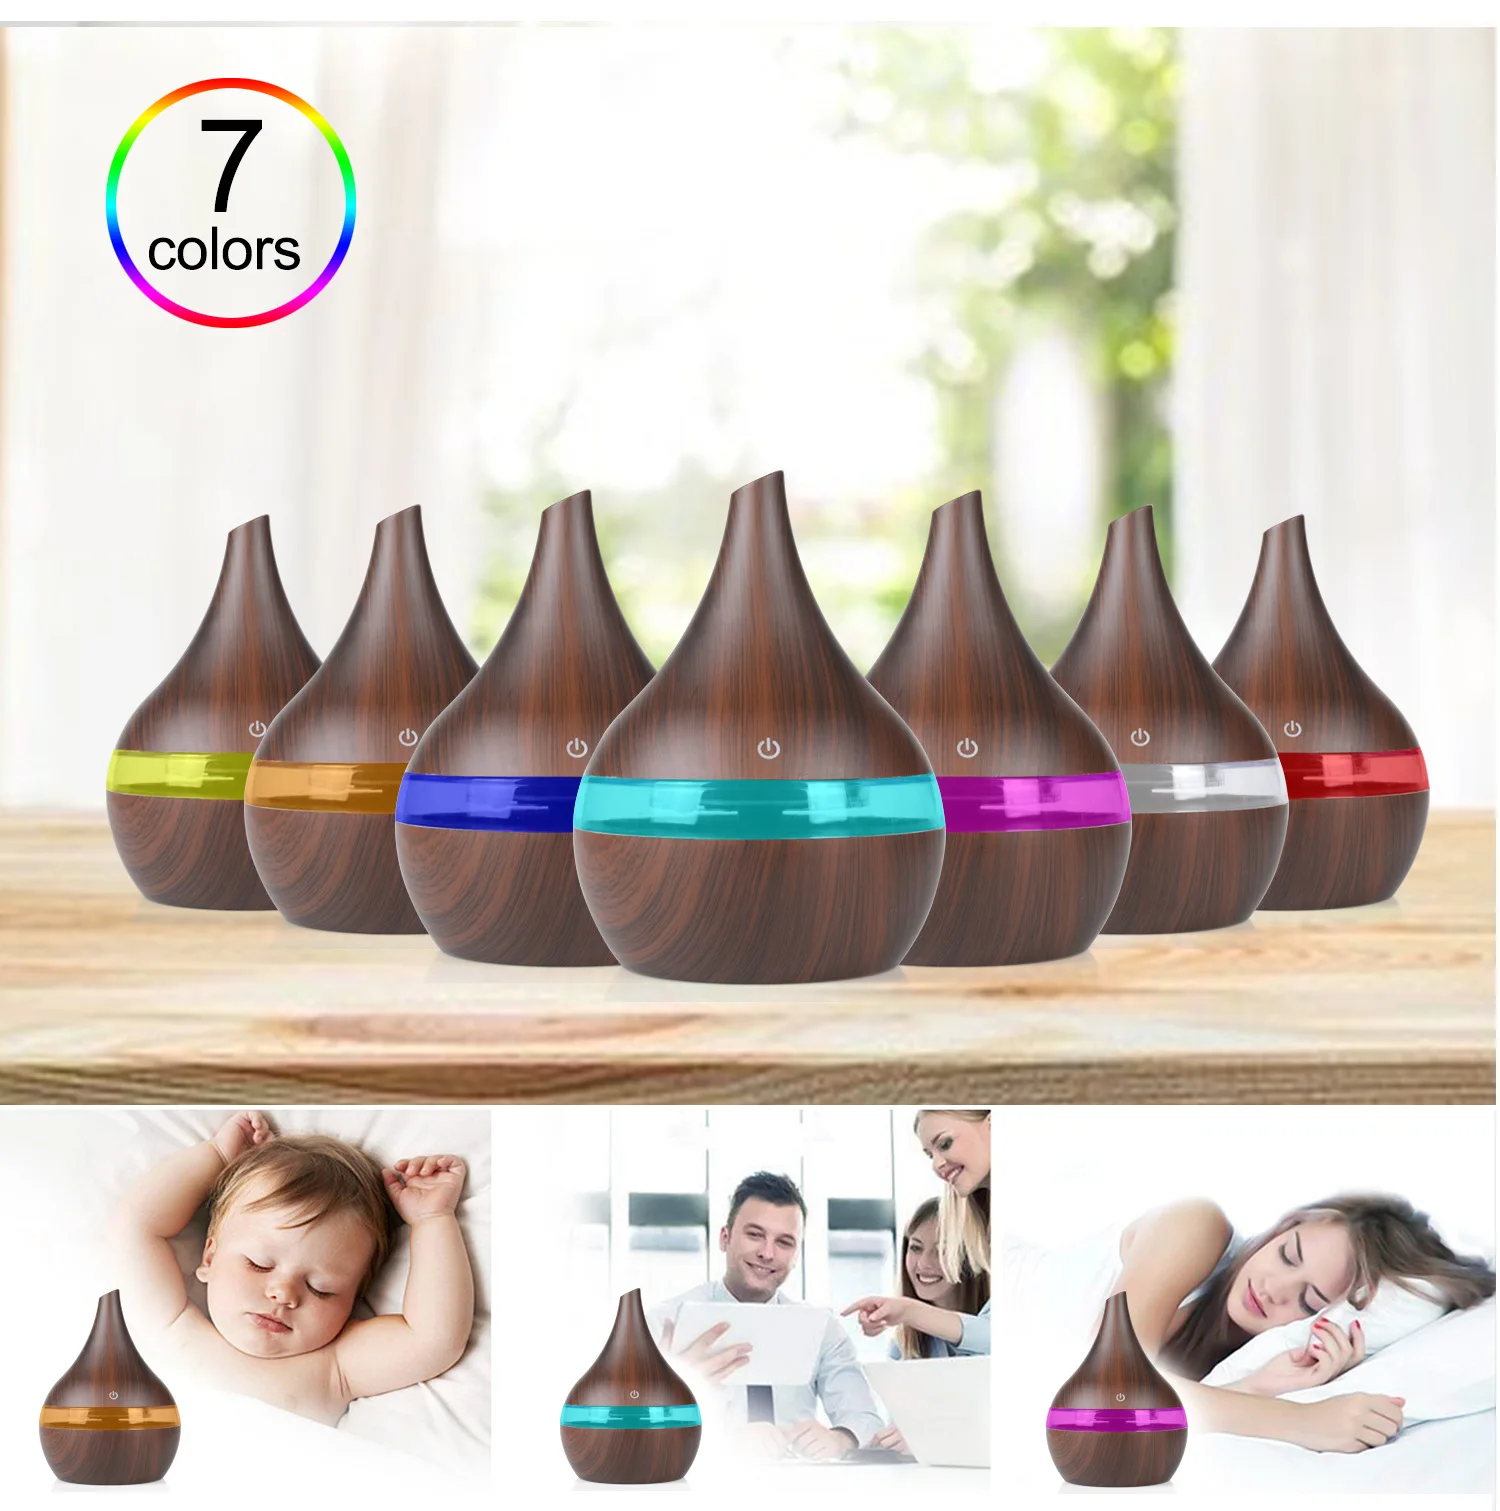 300ML Air Humidifier Aroma Diffuser Essential Oil Diffuser Wood Grain Aromatherapy Purifier Color LED Lamp Mist Maker Home